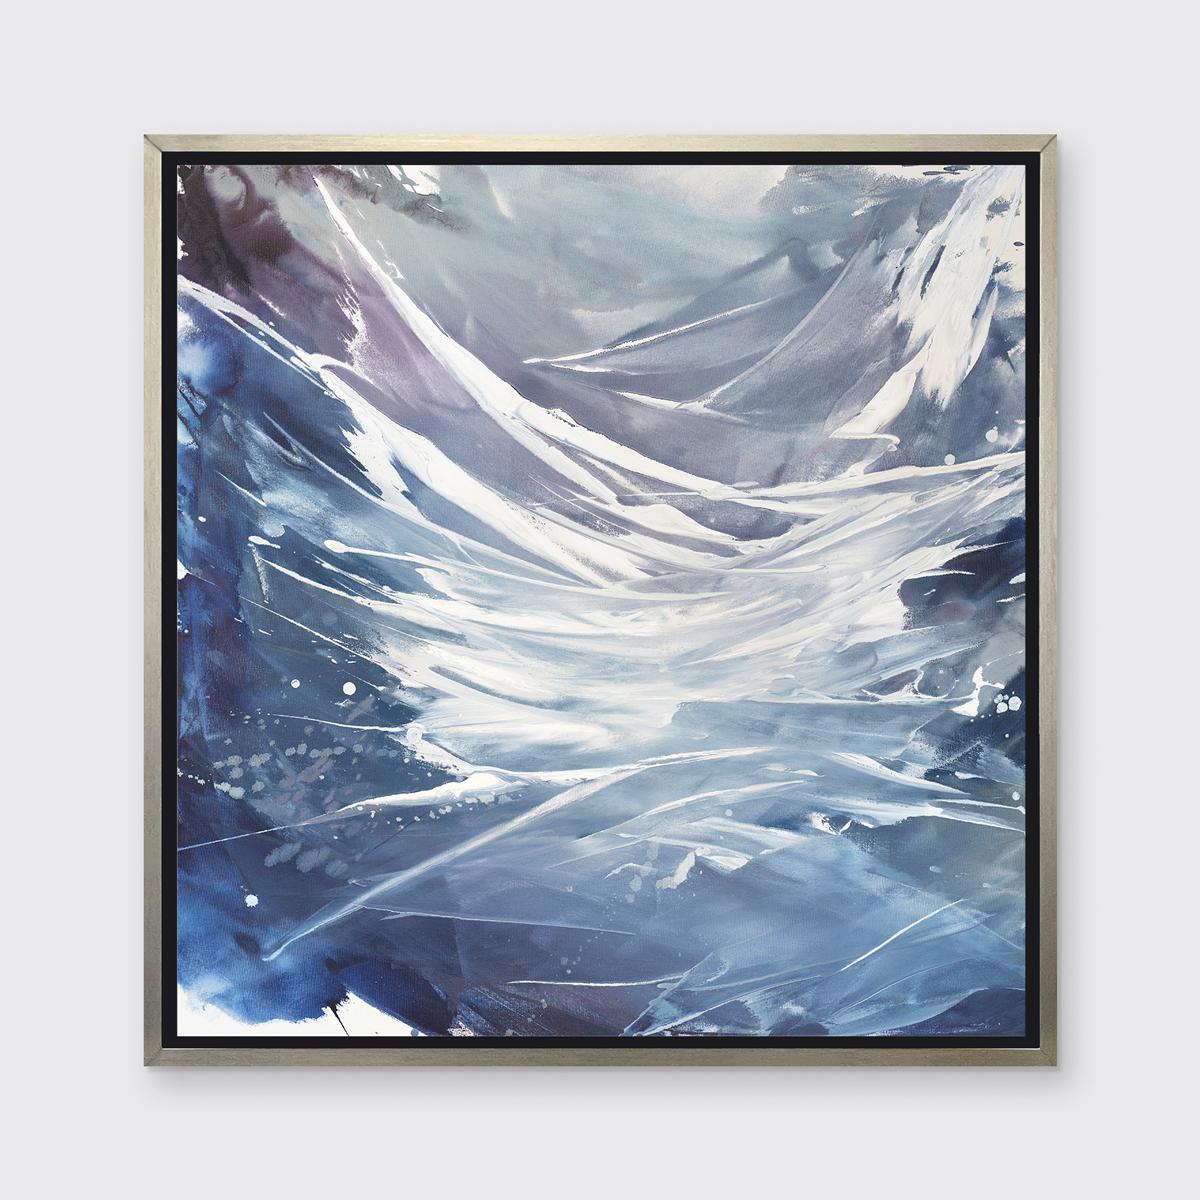 Teodora Guererra Abstract Print - "Fragments, " Framed Limited Edition Giclee Print, 48" x 48"